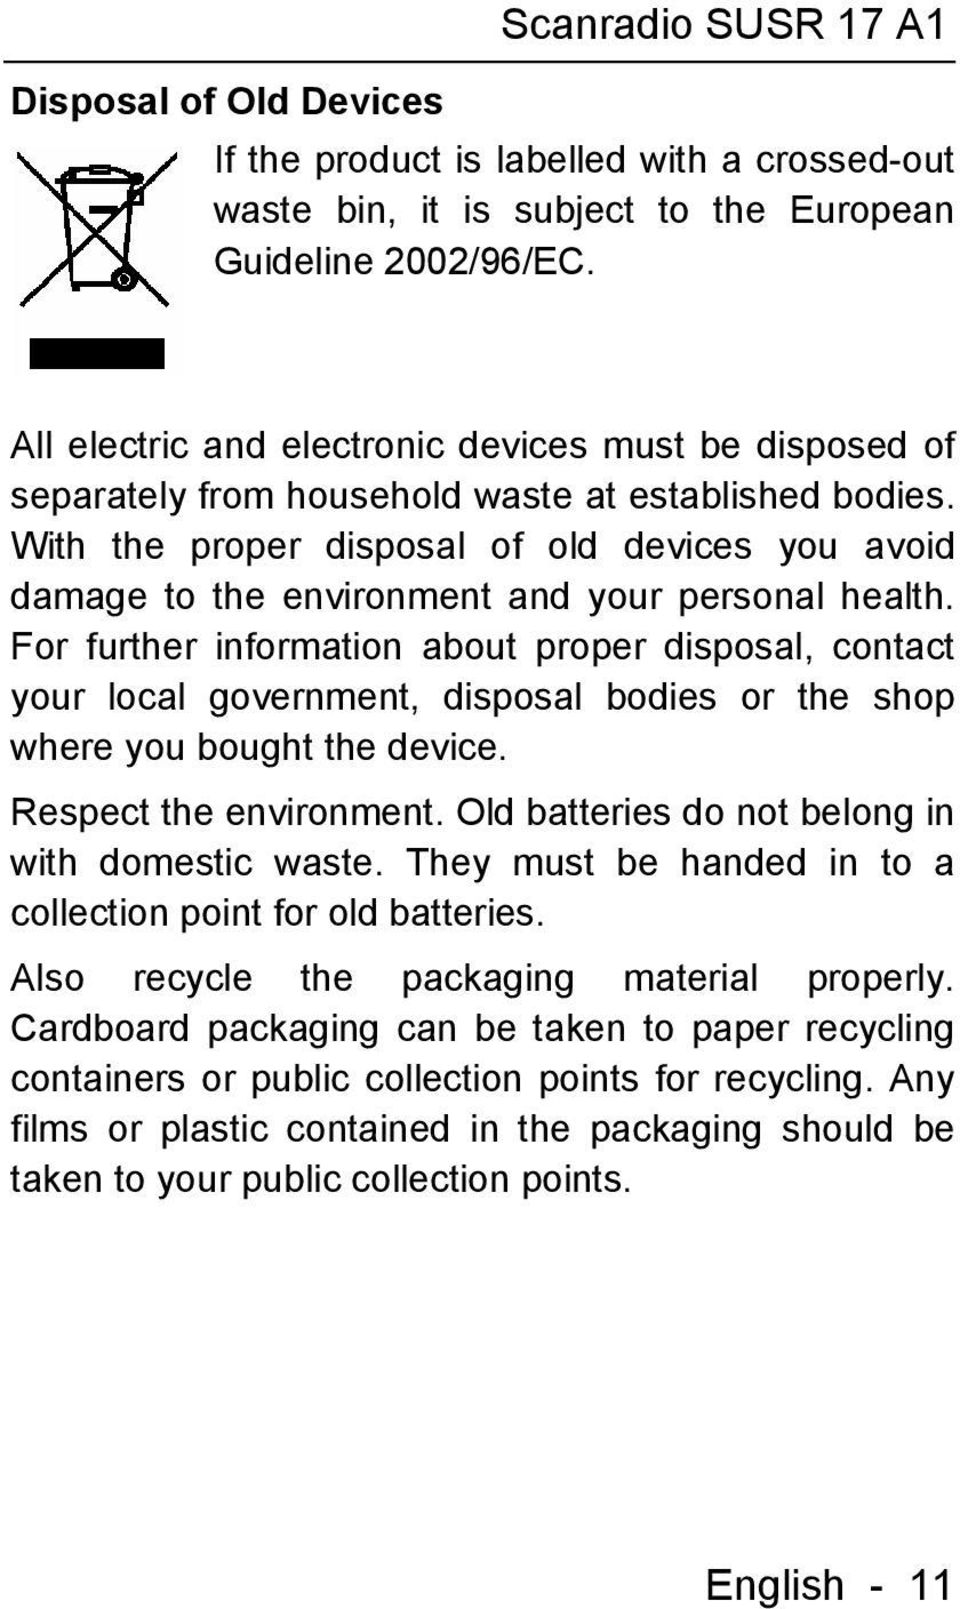 With the proper disposal of old devices you avoid damage to the environment and your personal health.